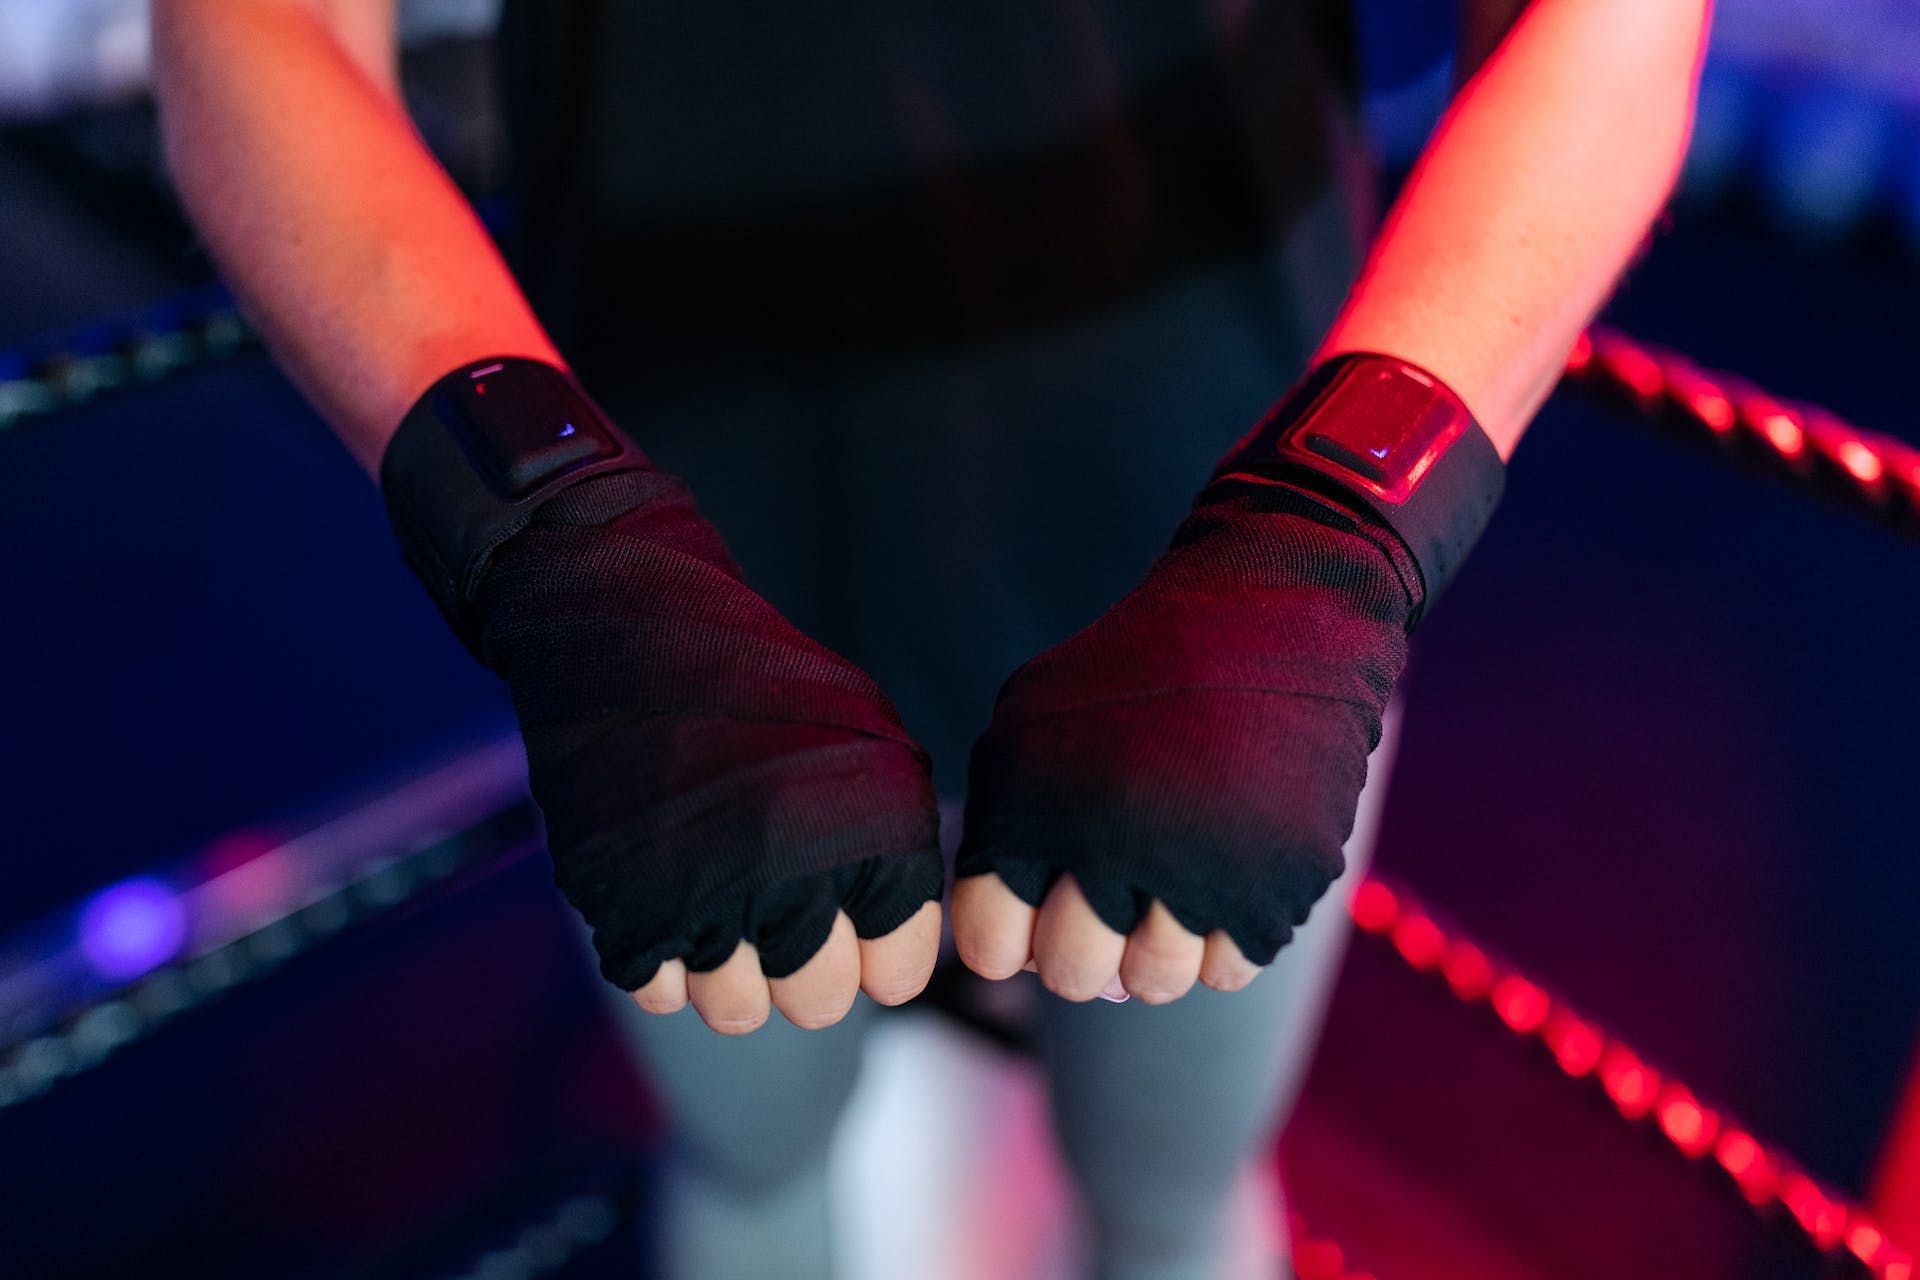 Hand Grippers can provide additional support (Image via Pexels/ThisIsEngineering)